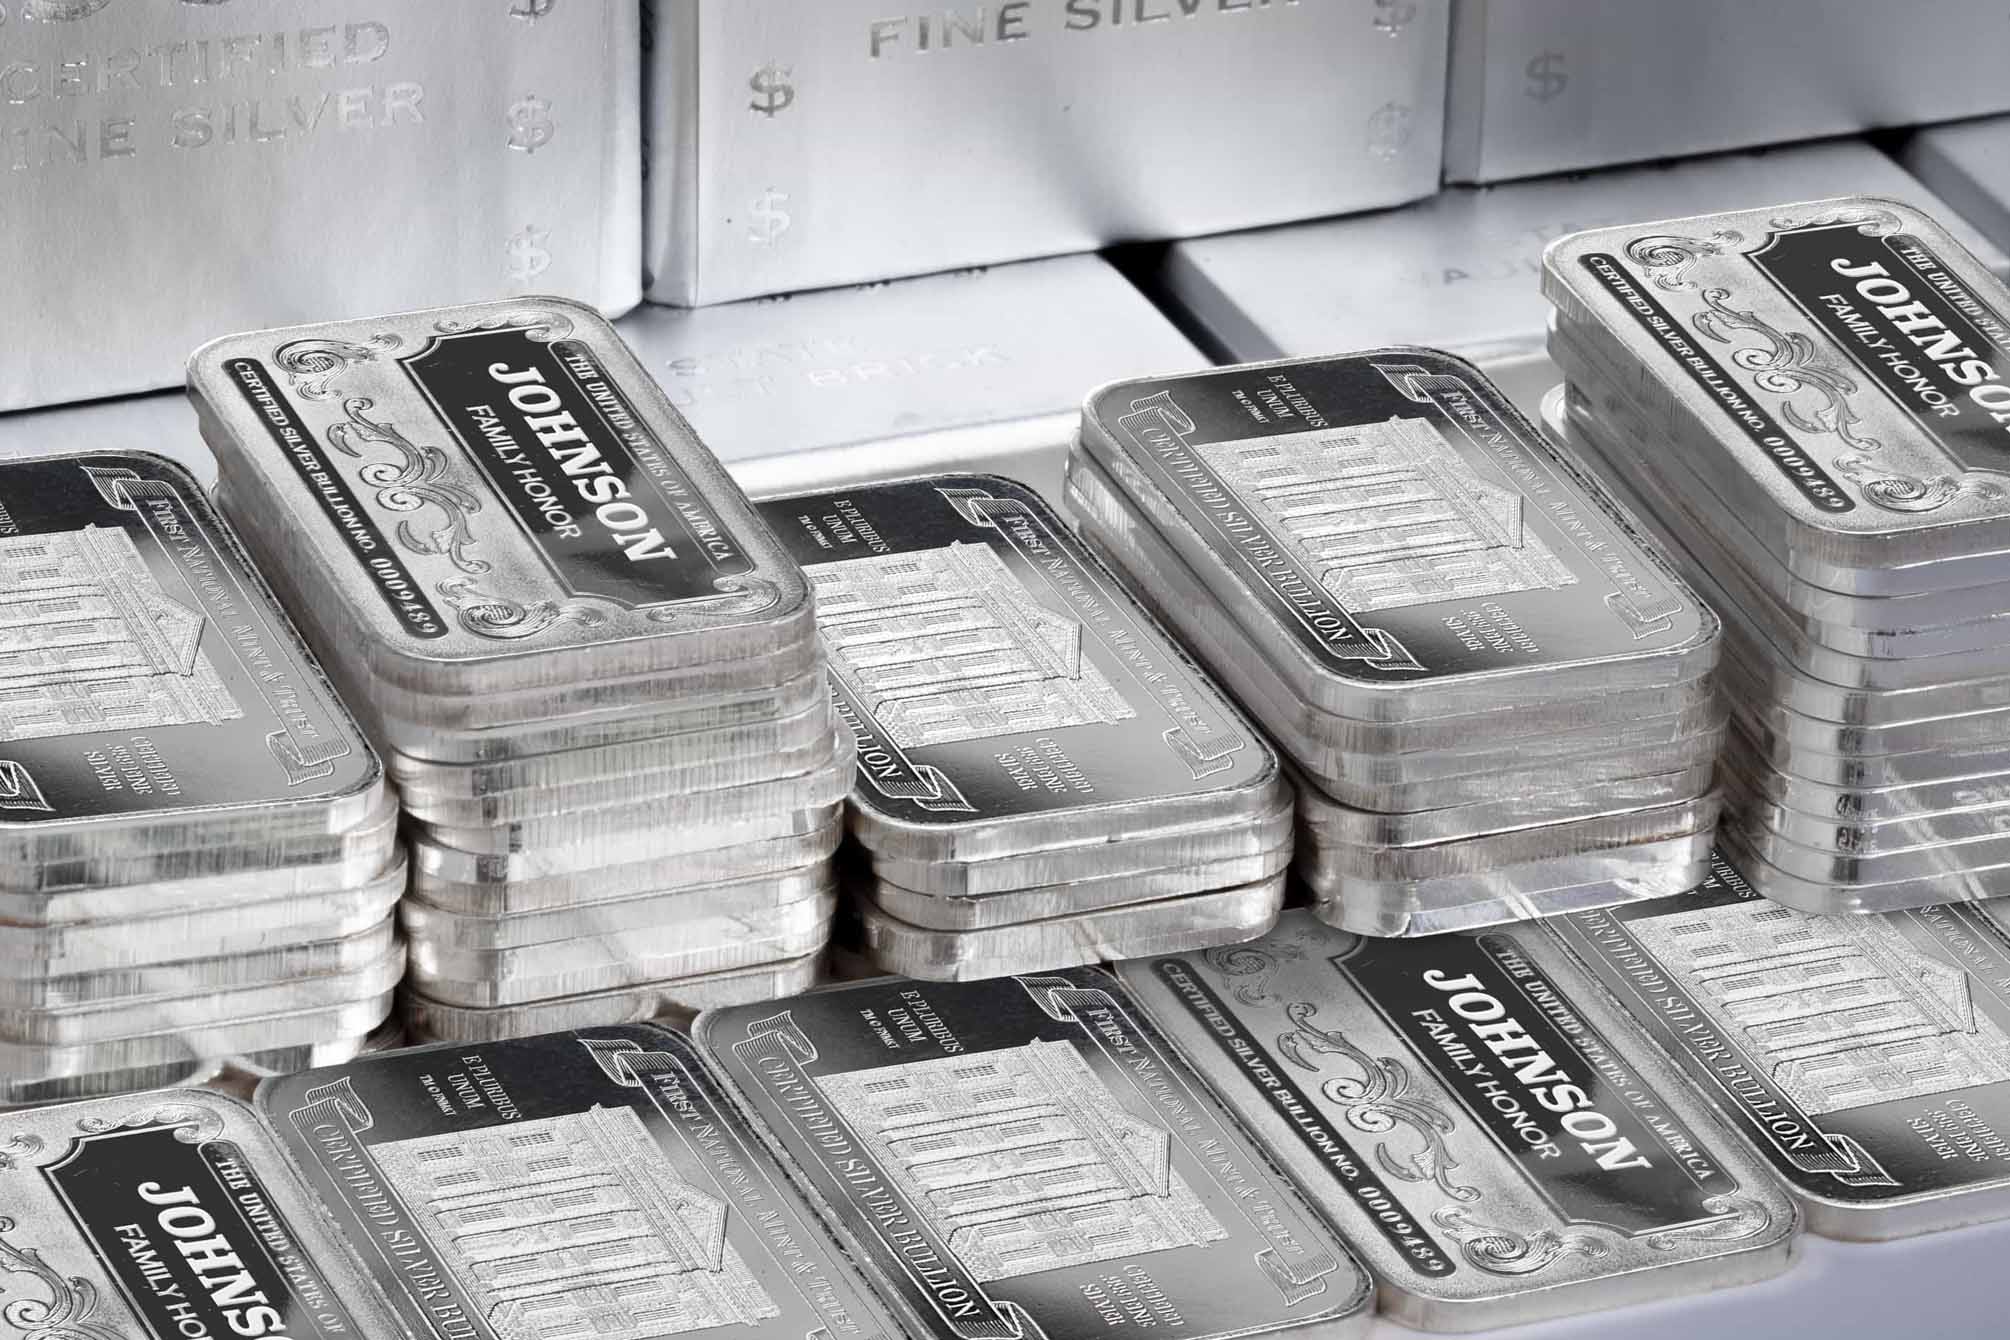 'Personalized Name' Family Honor Silver Bars, Certified Silver Bullion